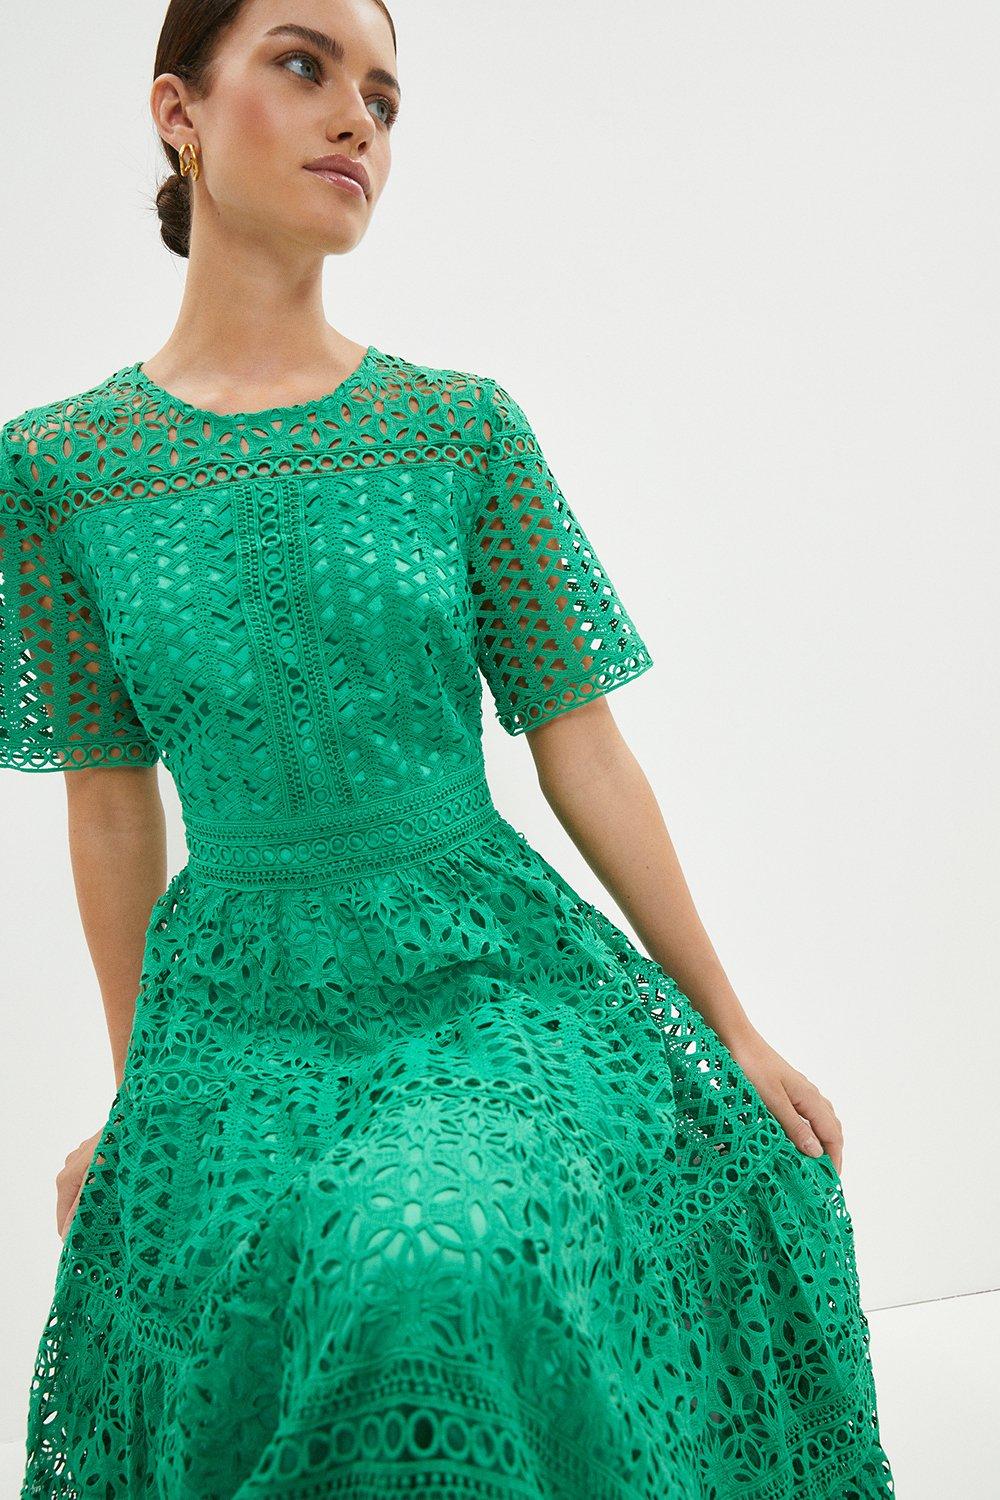 Petite Midi Dress In Lace With Tiers - Green